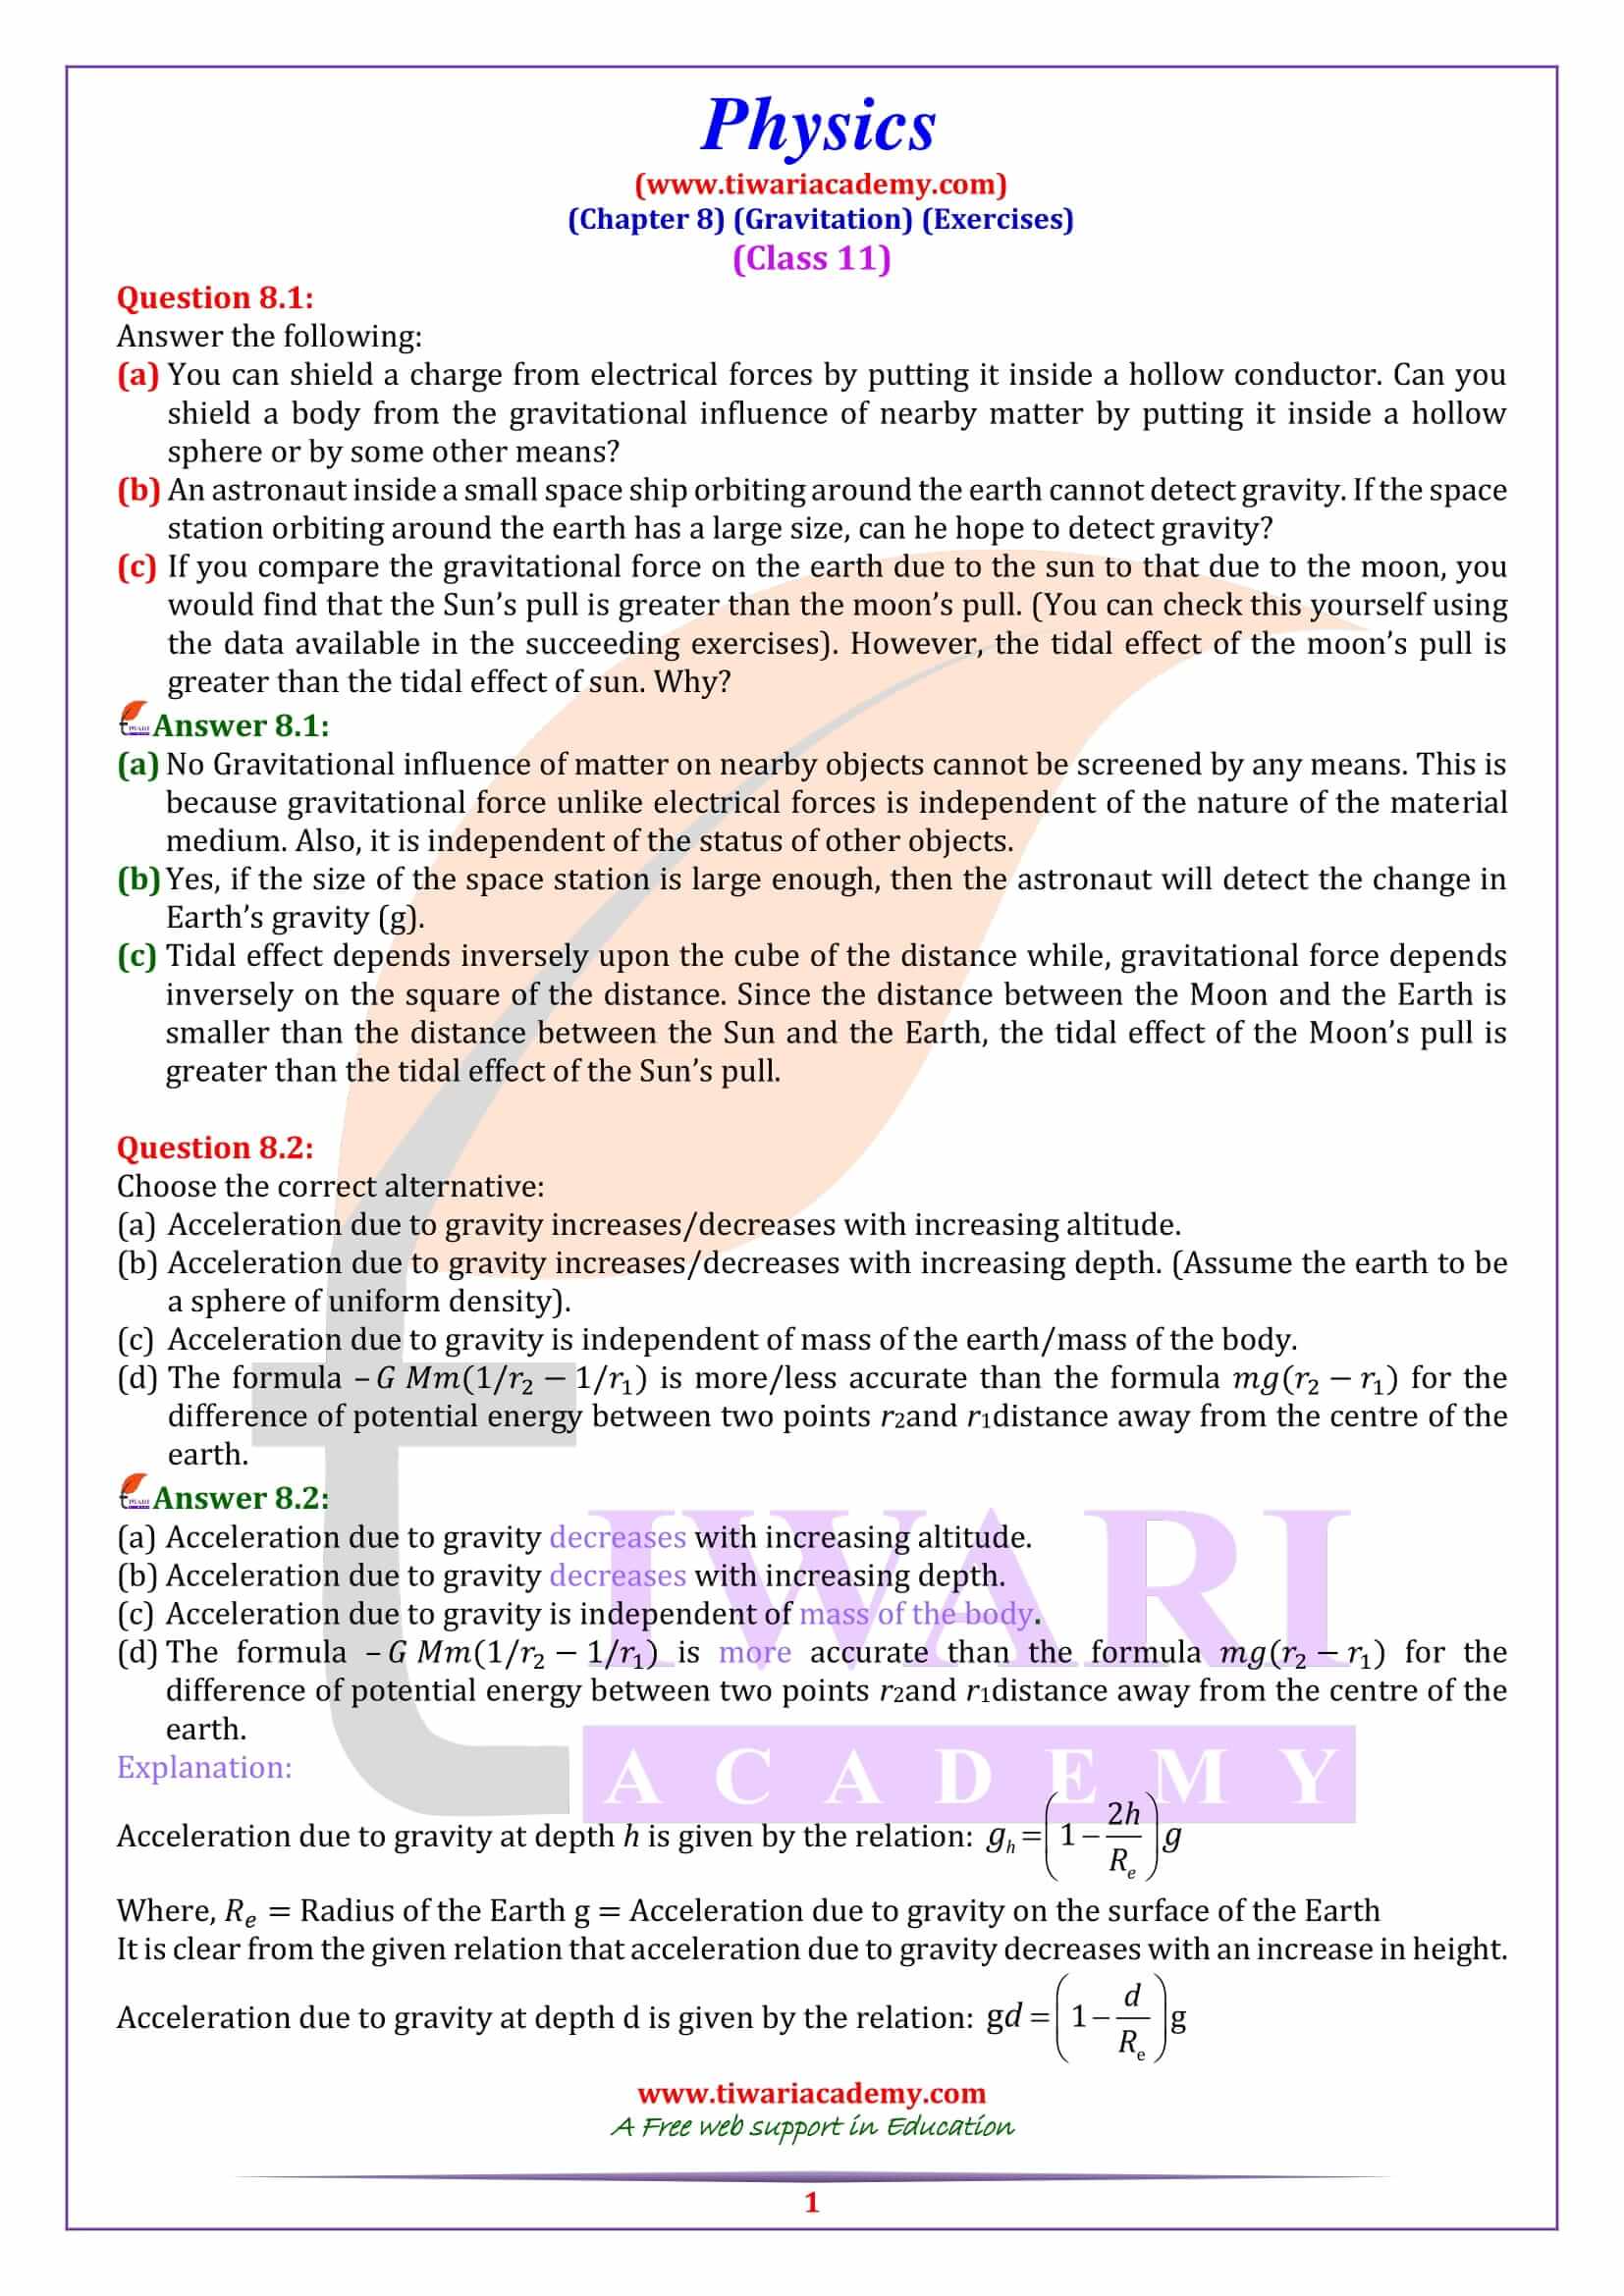 NCERT Solutions for Class 11 Physics Chapter 8 Exercises